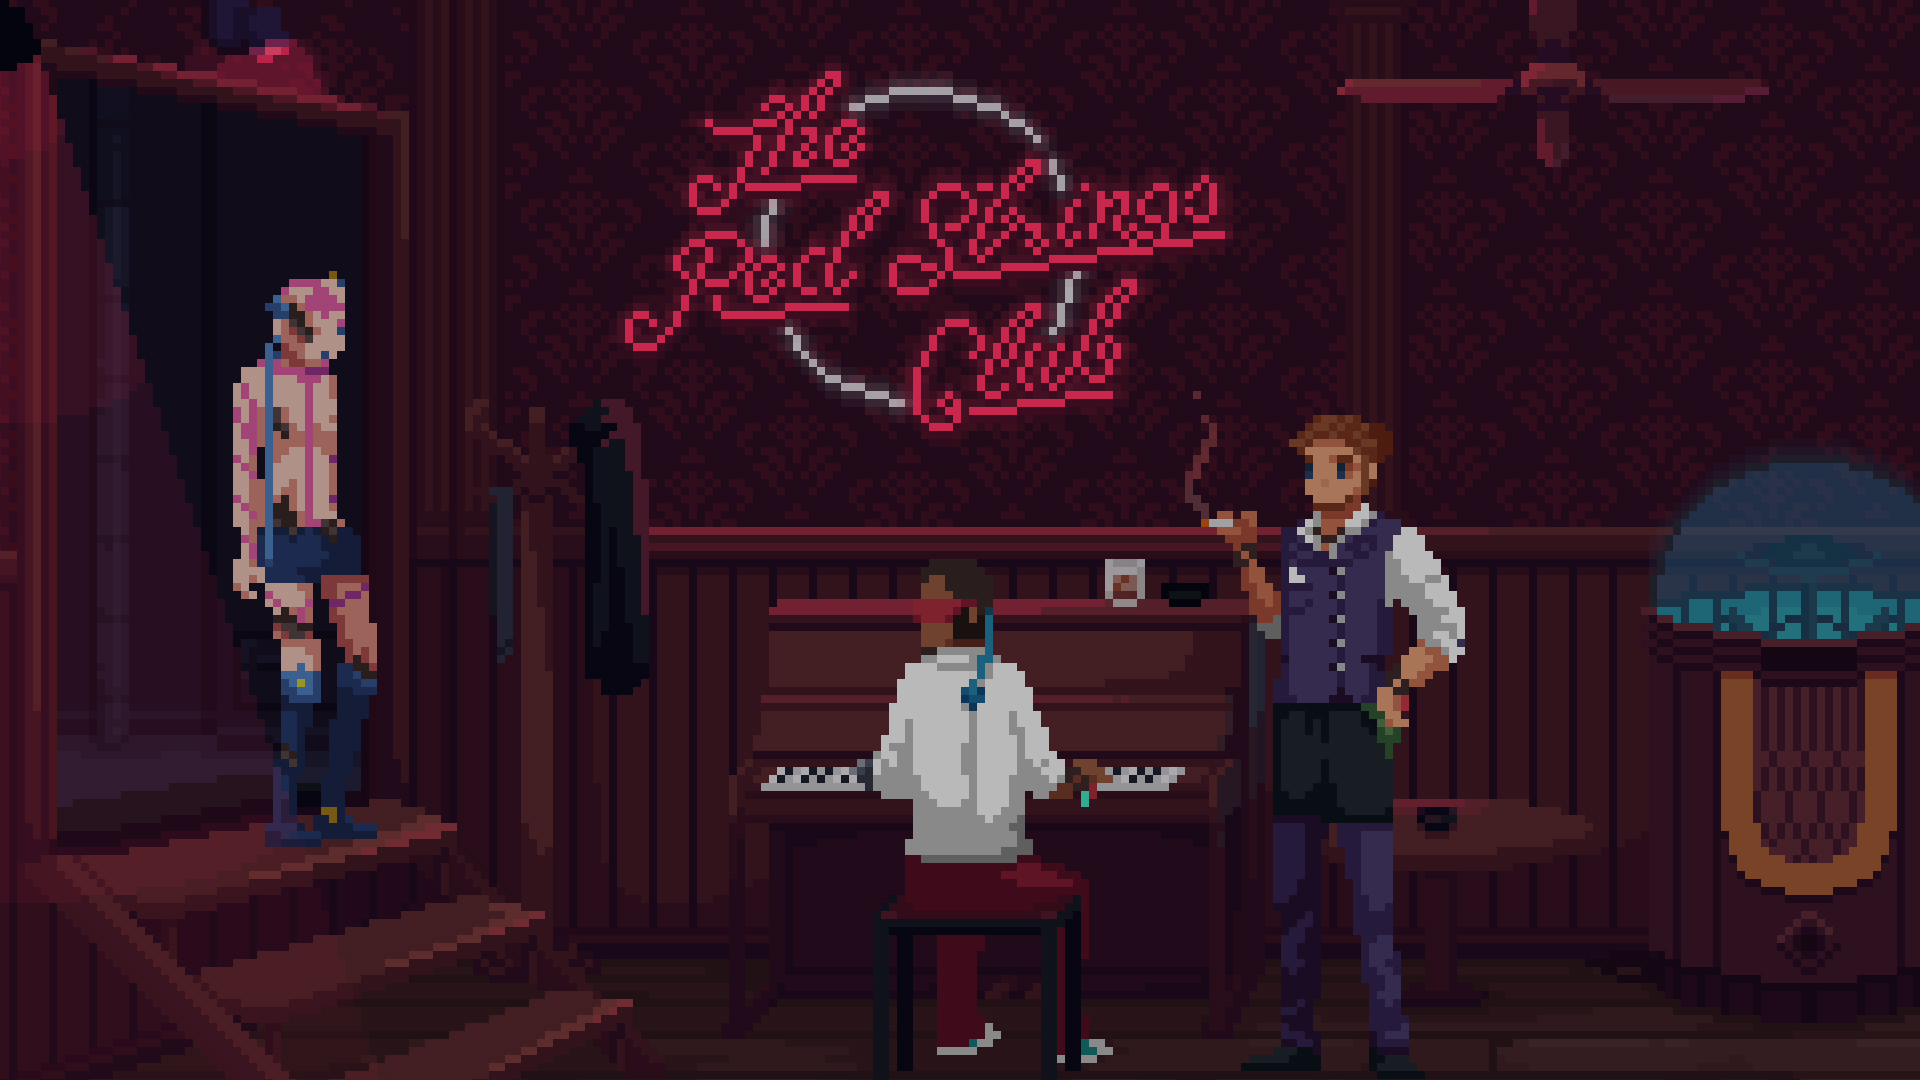 In pixel art style, the inside of a club has a neon sign that reds The Red Strings Club over a piano. A black man, Brandeis, sits playing and is looking to the entrance at the left. There's a humanoid robot with shorts and knee length boots standing. They have a wire from their head going into their back. They have purple stripes over their forehead and arms. To Brandeis's right is Donovan, a white man with brown hair in a bun. He's smoking and watching.